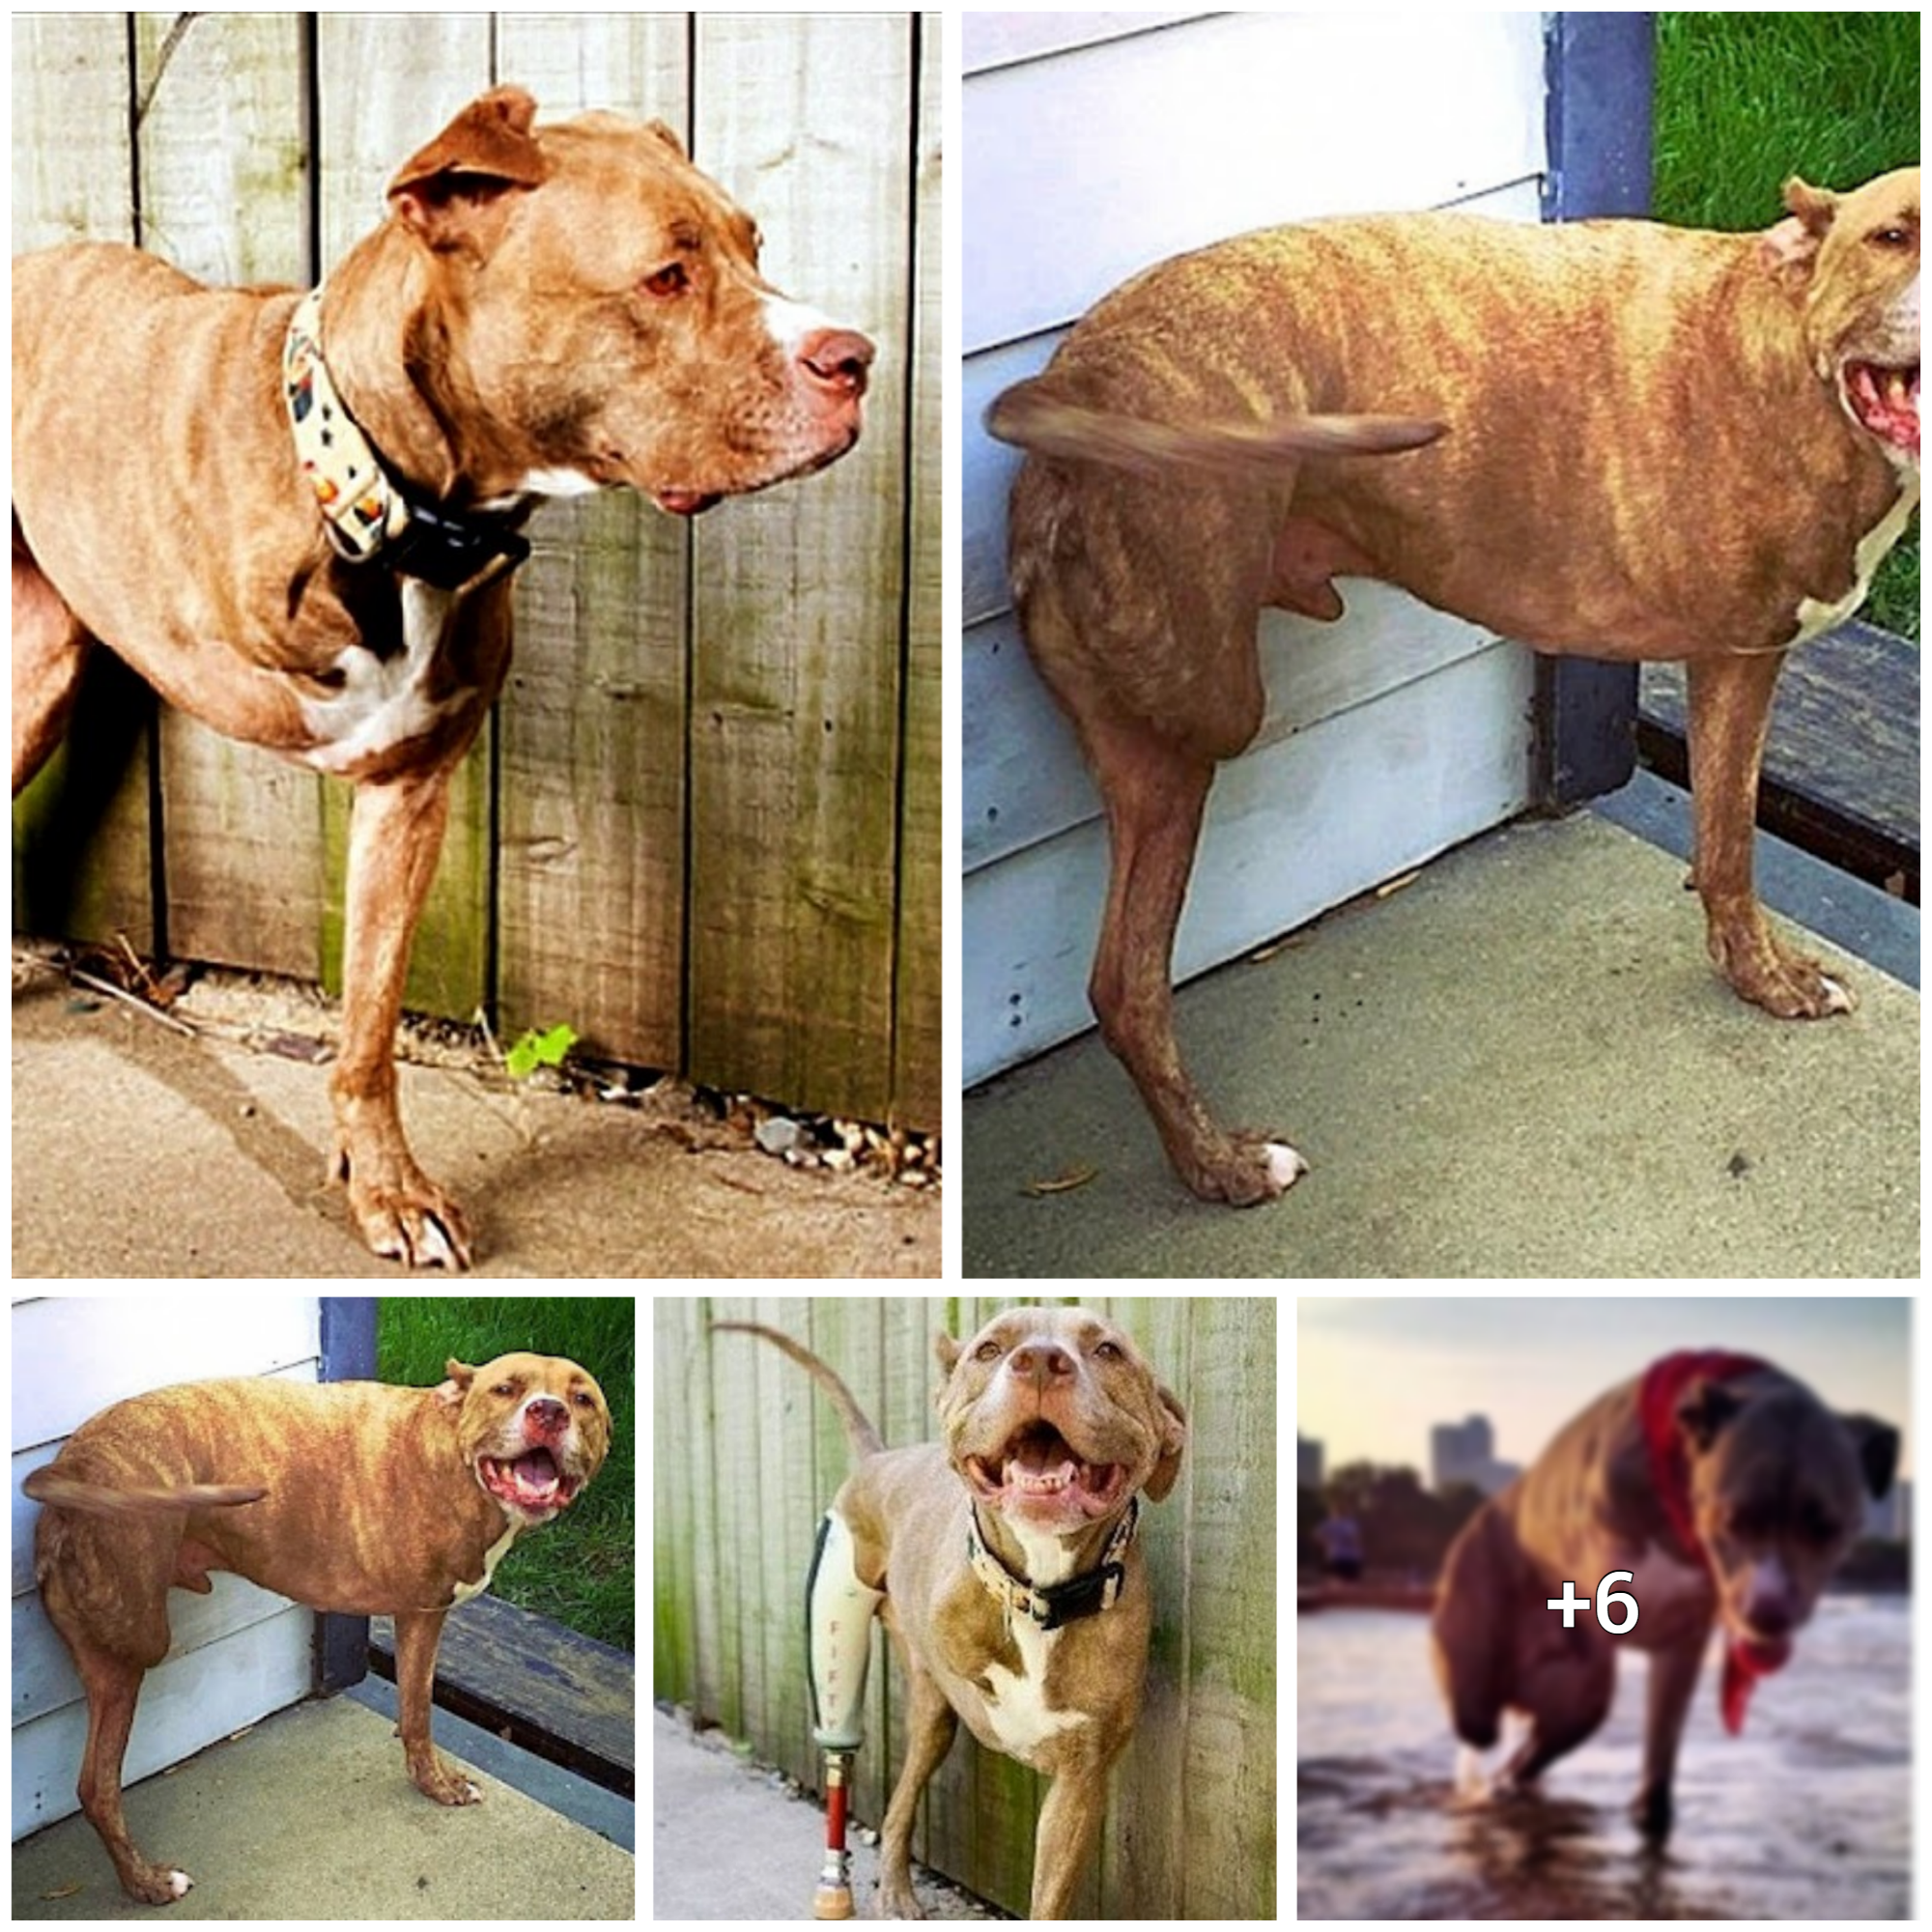 Pitbull Survives Gunshot Wound and Heroically Adapts to Life with Two Prosthetic Limbs